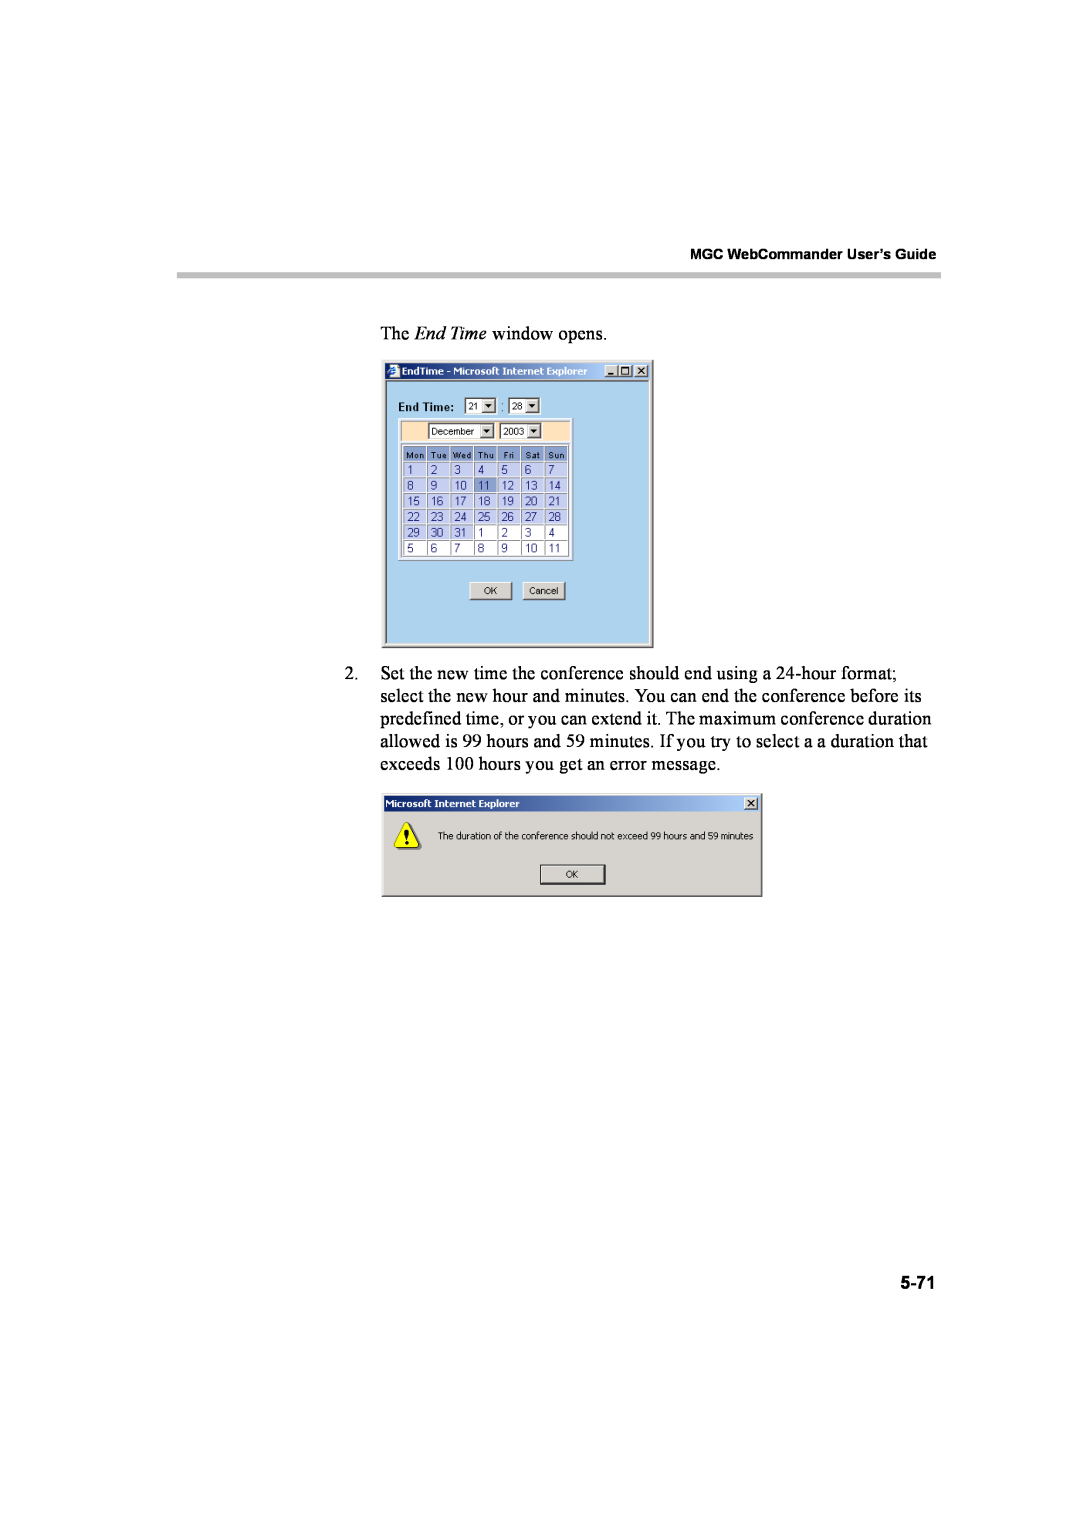 Polycom 8 manual The End Time window opens, 5-71, MGC WebCommander User’s Guide 